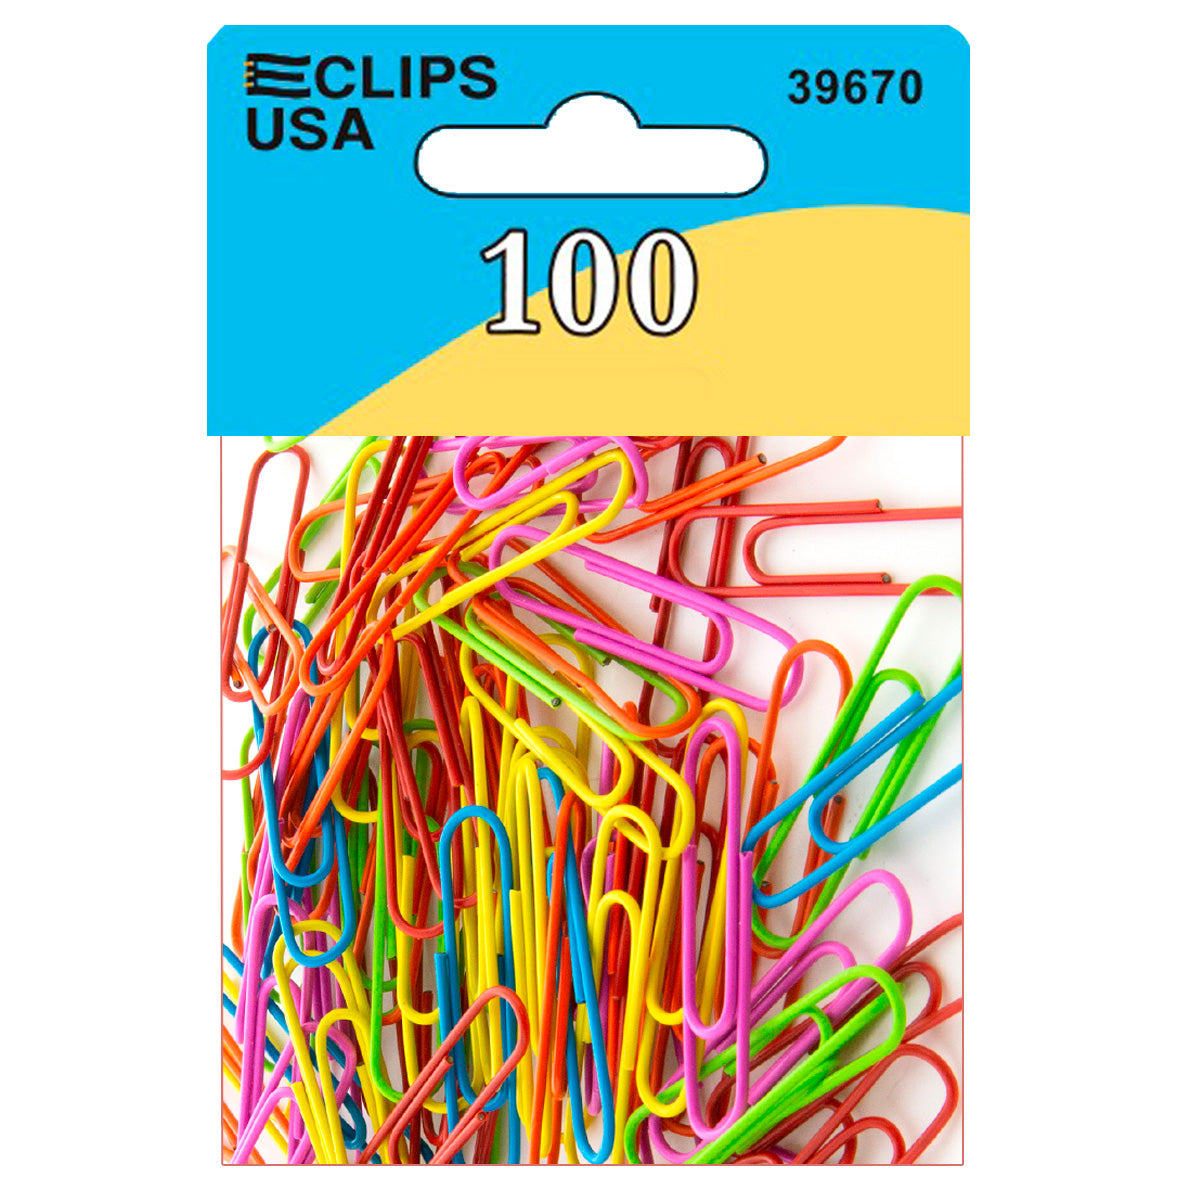 39670: Paper Clips - 100 Pack